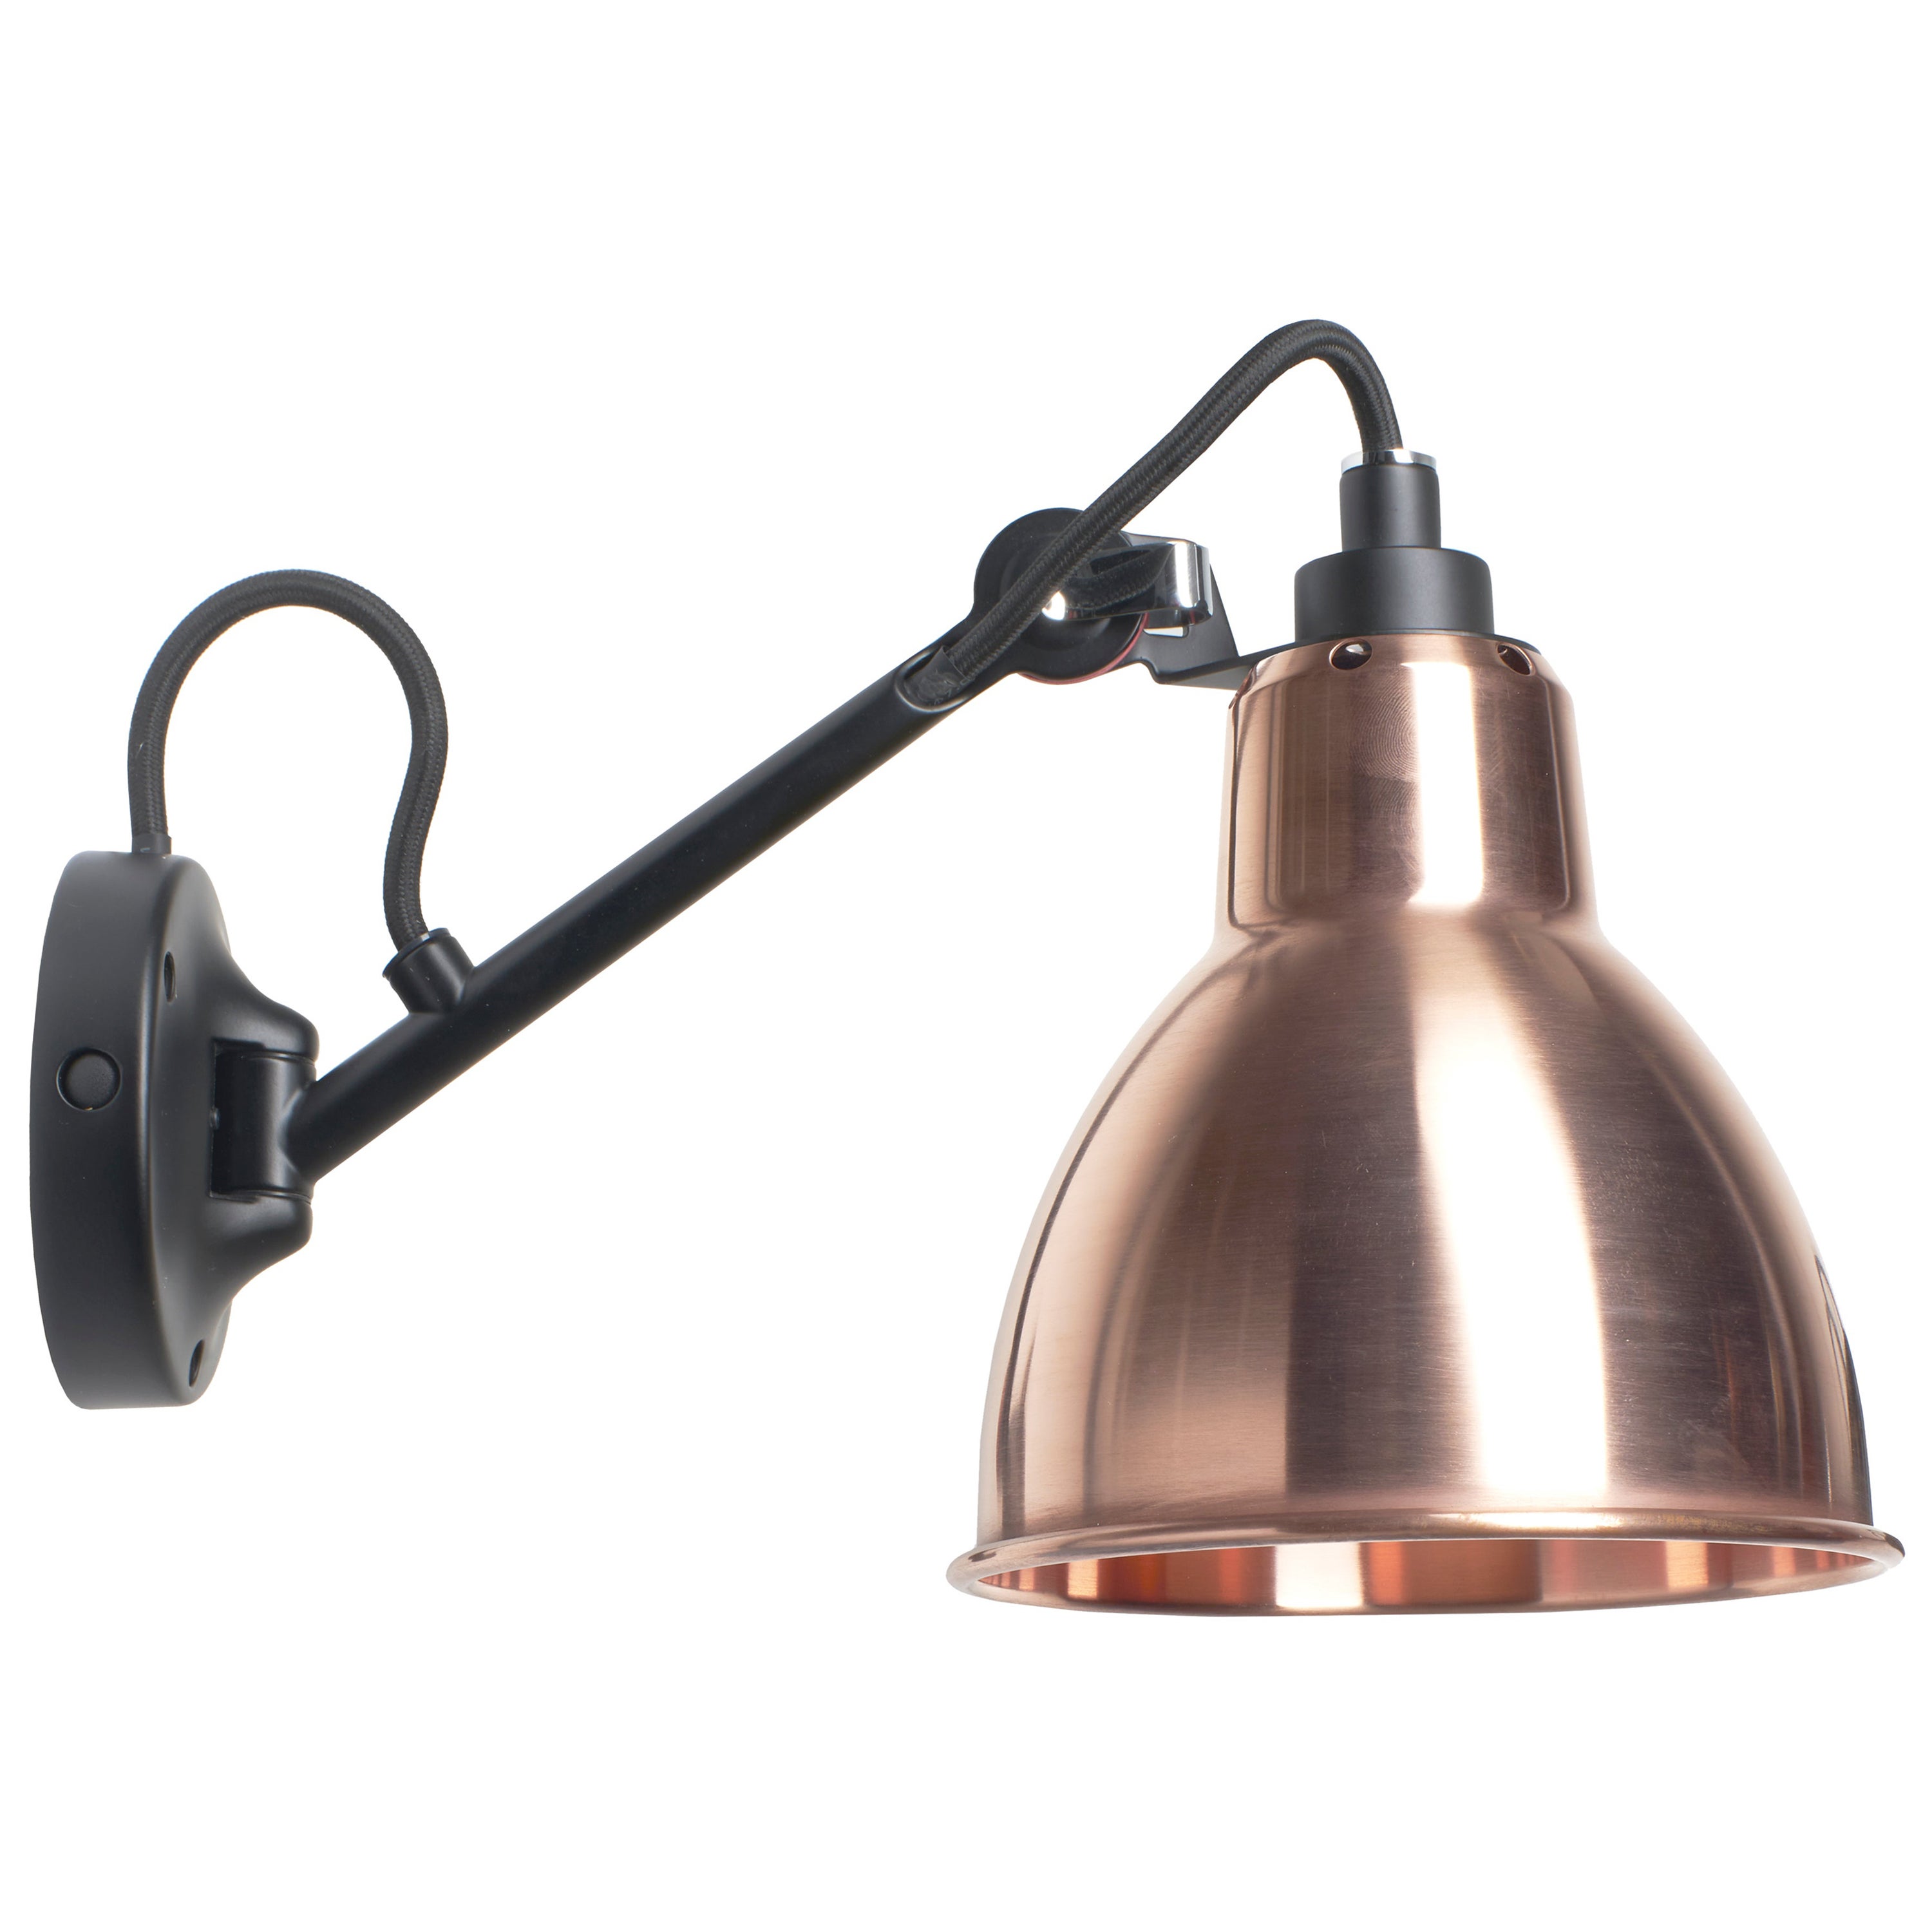 DCW Editions La Lampe Gras N°104 Wall Lamp in Black Arm and Raw Copper Shade For Sale